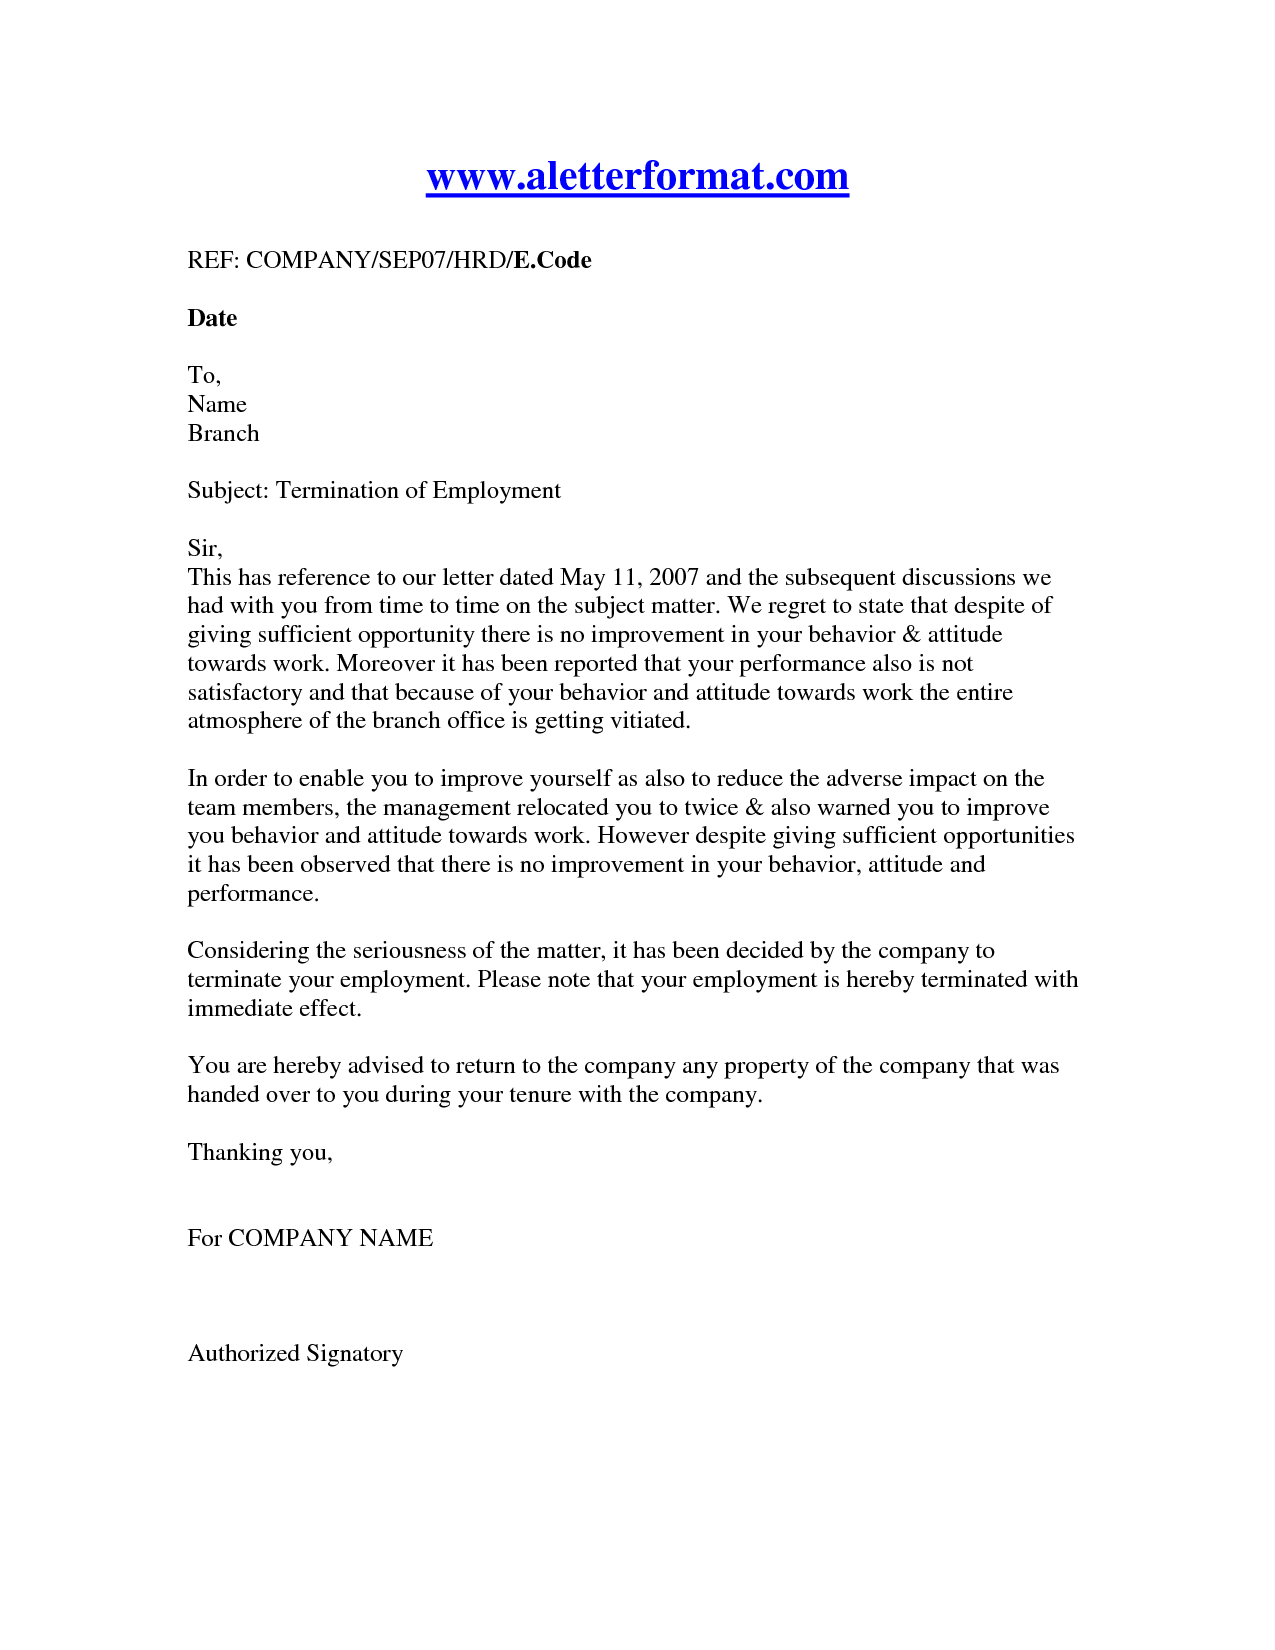 employment-contract-termination-letter-free-printable-documents